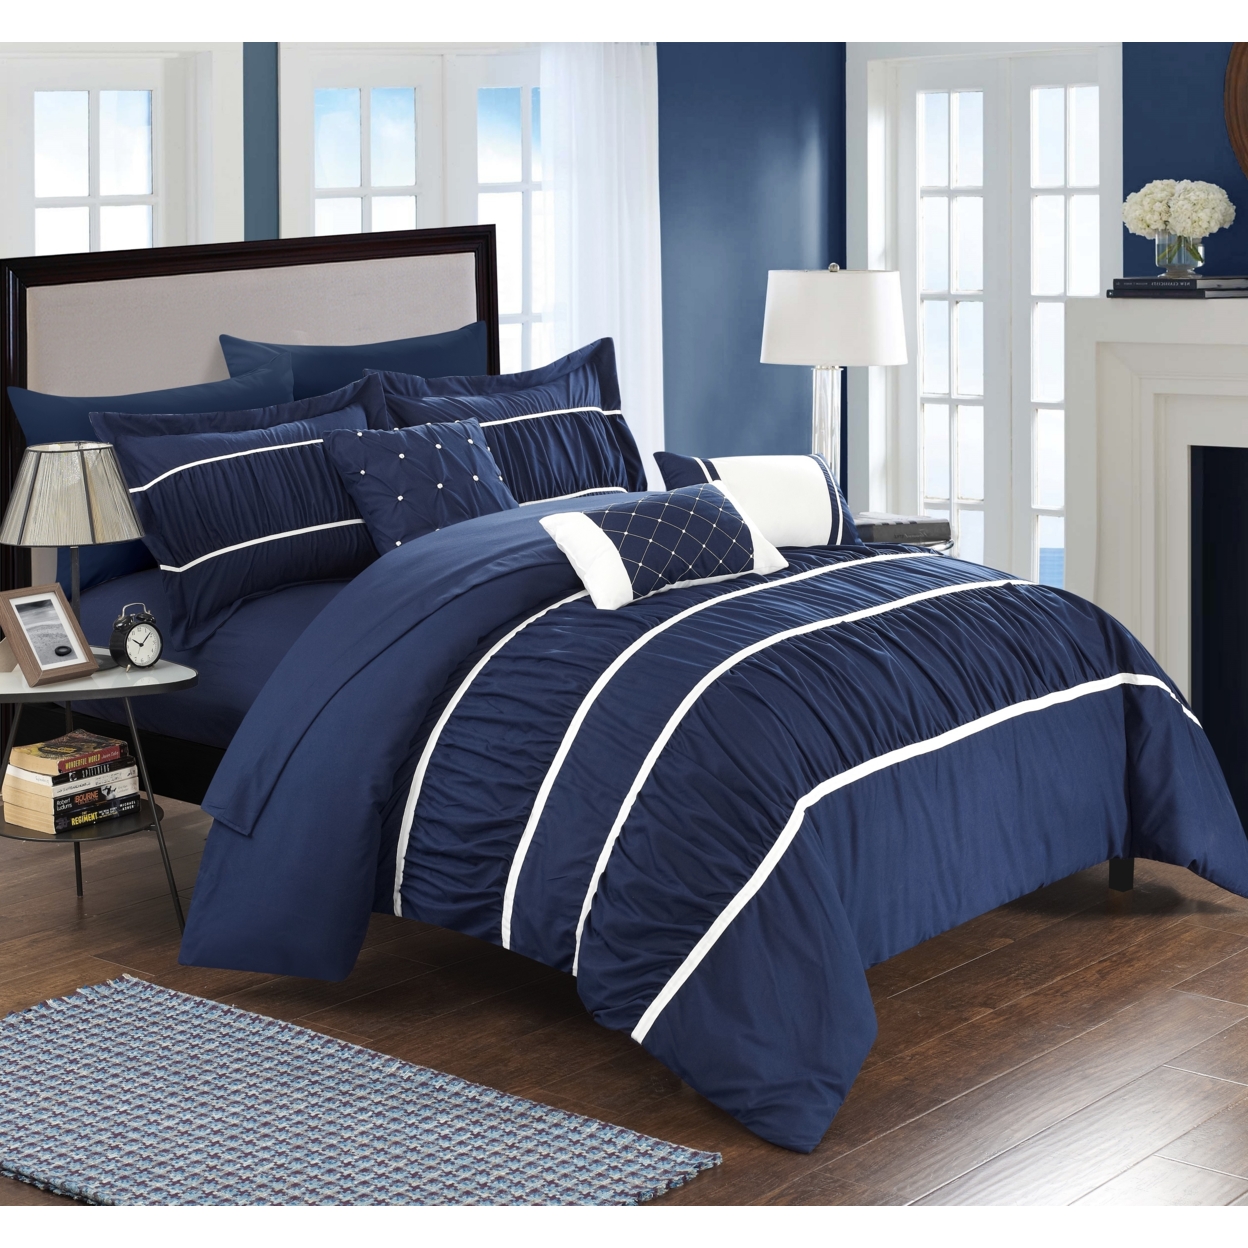 10-Piece Aero Pleated & Ruffled Bed In A Bag Comforter And Sheet Set - Navy, King